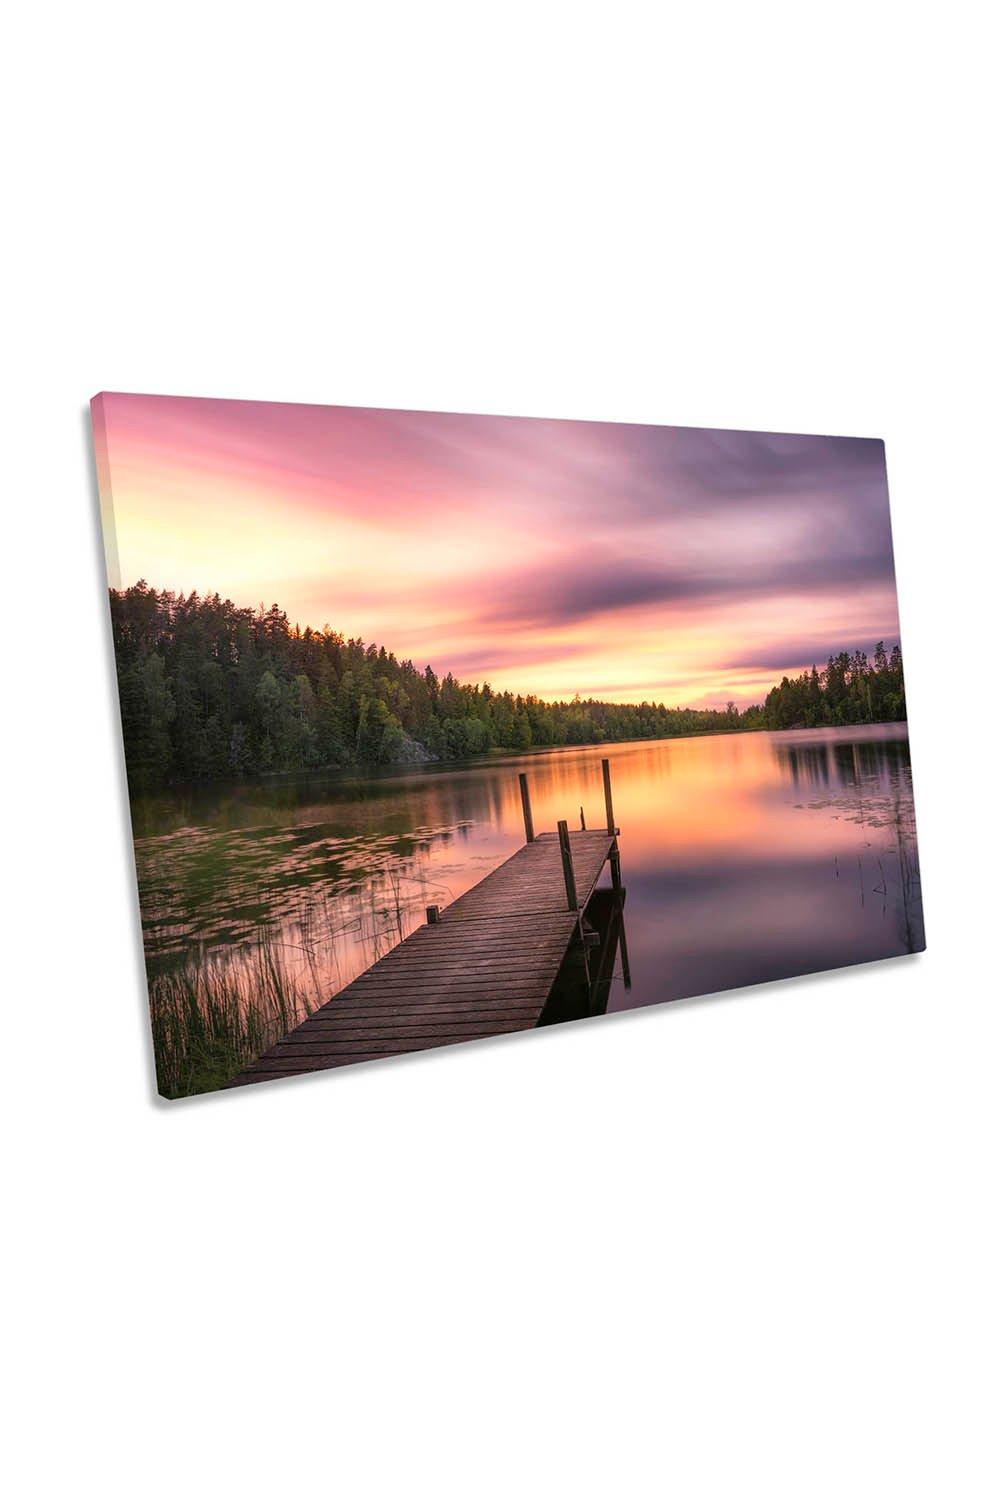 Pink Sunset Lake Landscape Peaceful Jetty Canvas Wall Art Picture Print